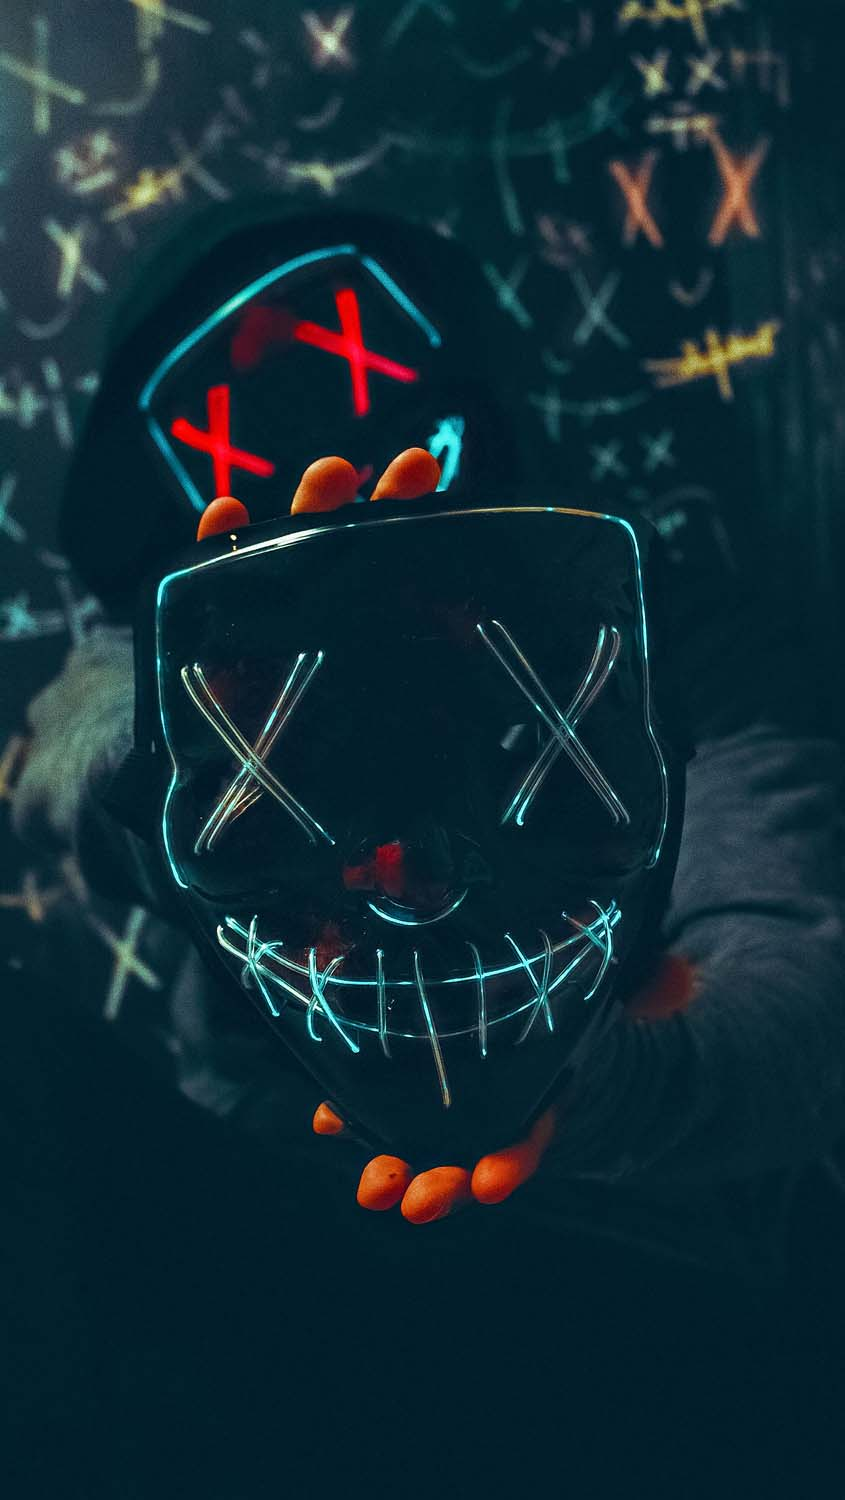 Stitch Mask iPhone Wallpaper 4K  iPhone Wallpapers